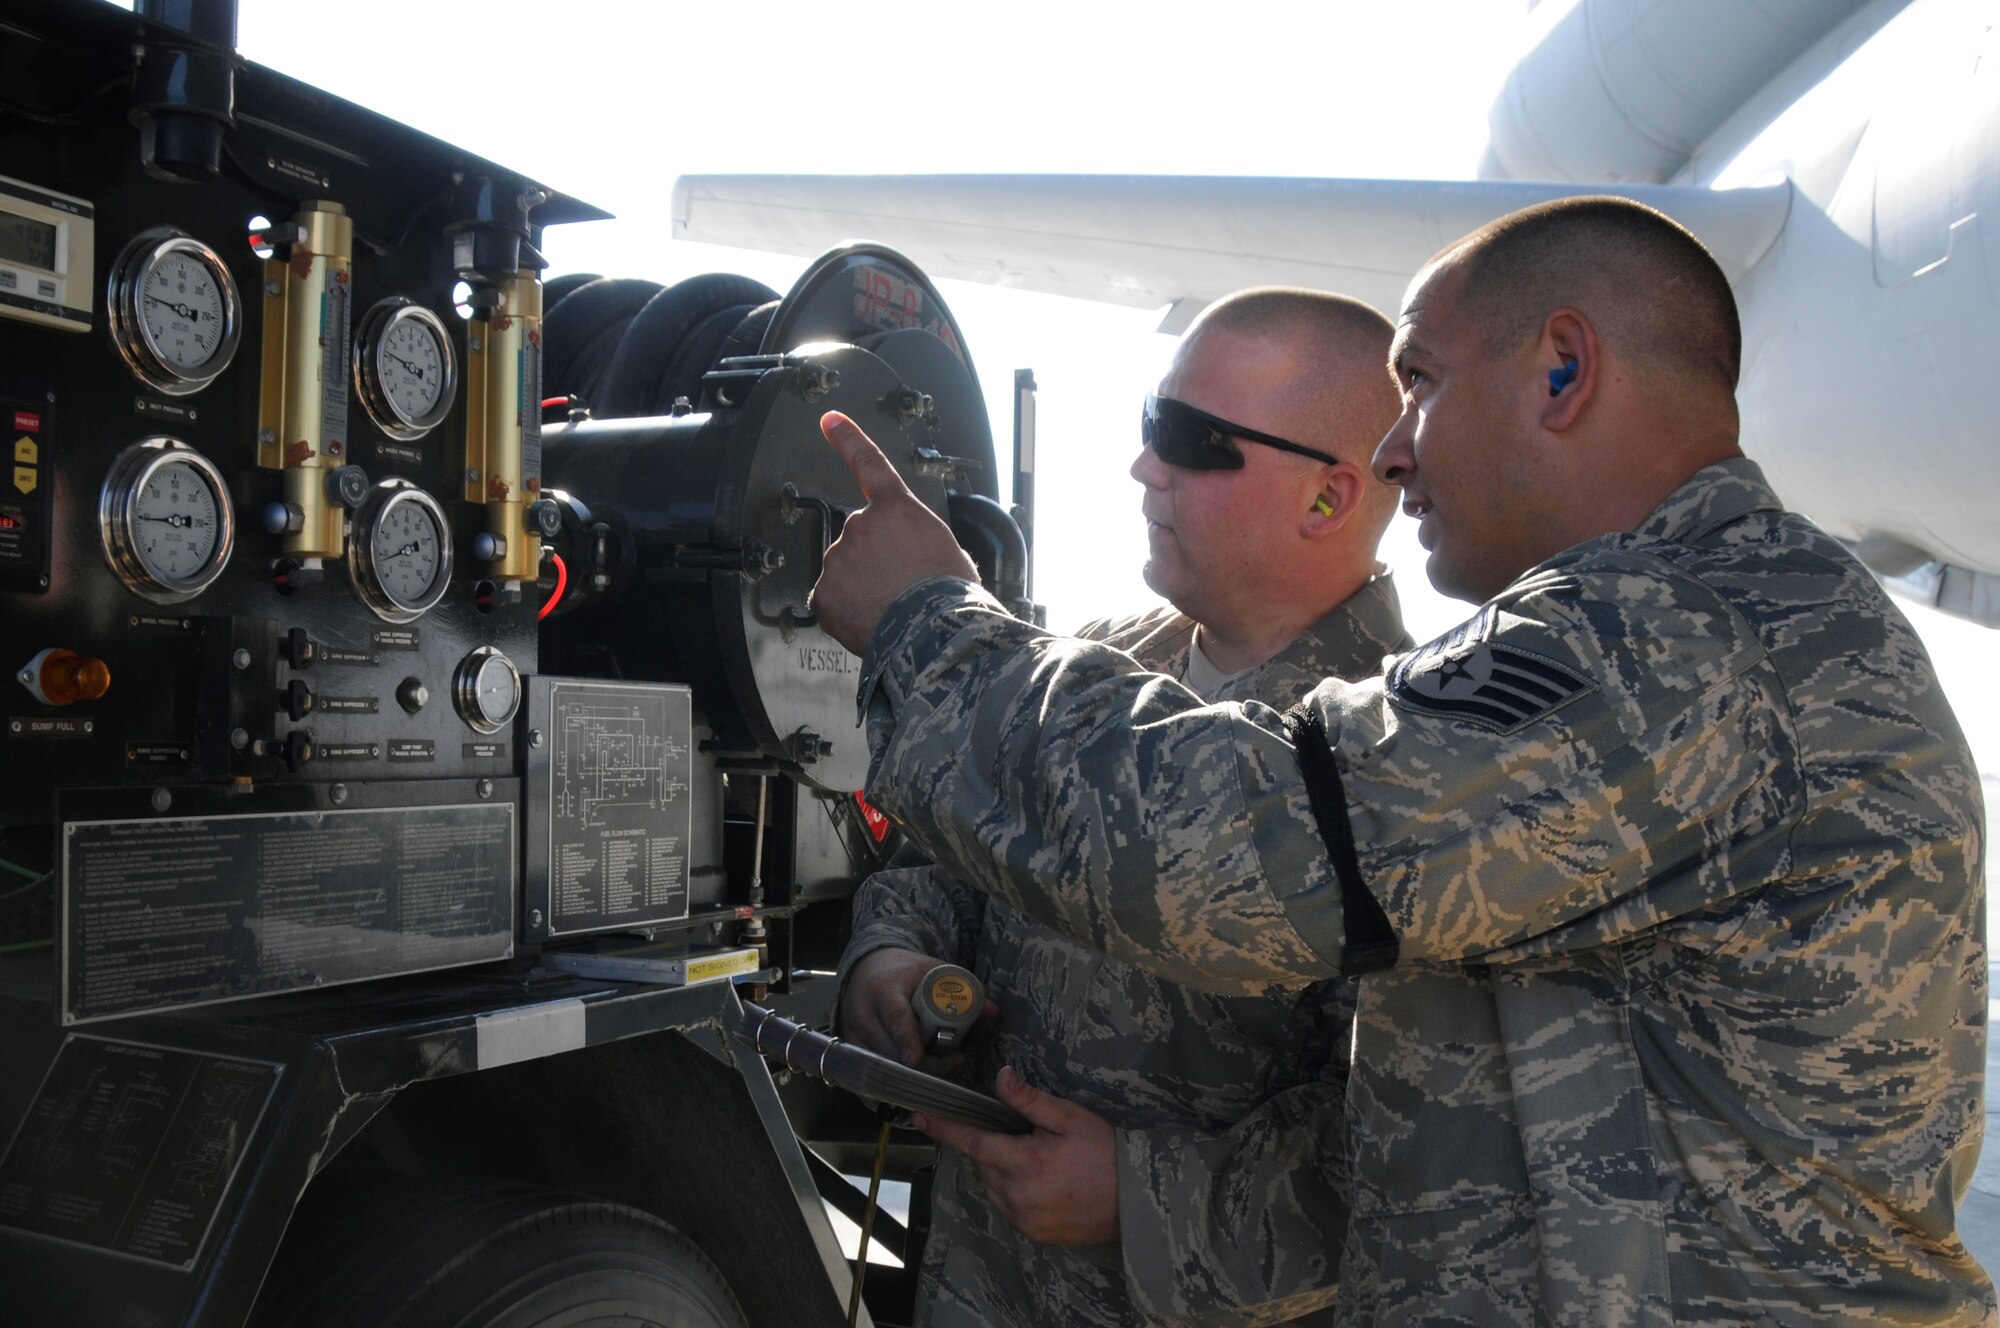 SOUTHWEST ASIA -- Staff Sgt. Joshua Schubert, 380th Expeditionary Logistics Readiness Squadron distribution supervisor performs a spot check on Airman 1st Class Brian Holley, 380th ELRS fuels operator as he refuels a KC-10 Extender, Jan 21. Sergeant Schubert performs checks at random to ensure proper procedures are followed during aircraft refueling. Sergeant Schubert is deployed from Eglin AFB, Fla. and is from Hatboro, Pa. Airman Holley is deployed from the 178th Fighter Wing, Ohio Air National Guard and is from Dayton, OH. (U.S. Air Force photo by Senior Airman Brian J. Ellis) (Released)